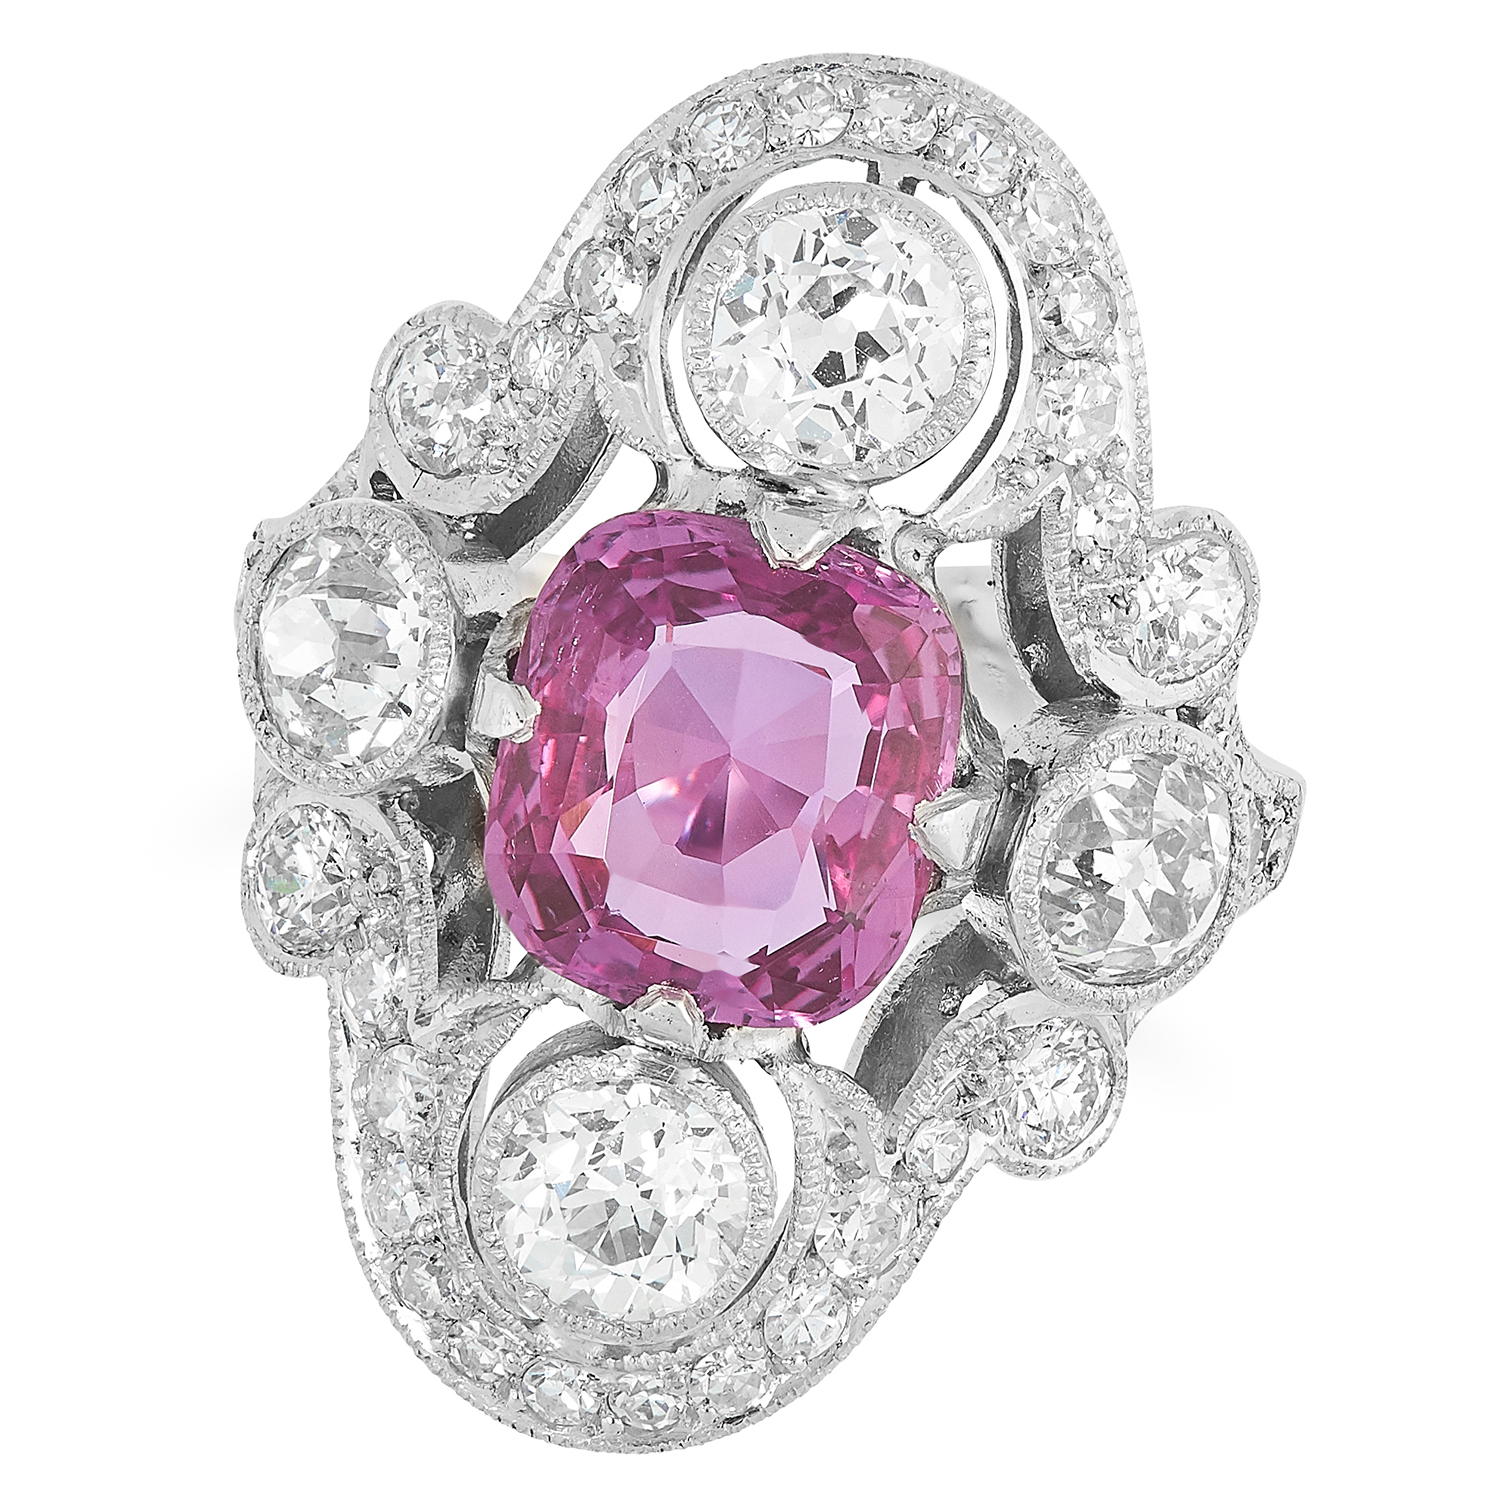 A CEYLON PINK SAPPHIRE AND DIAMOND DRESS RING set with a cushion cut pink sapphire of 3.45 carats